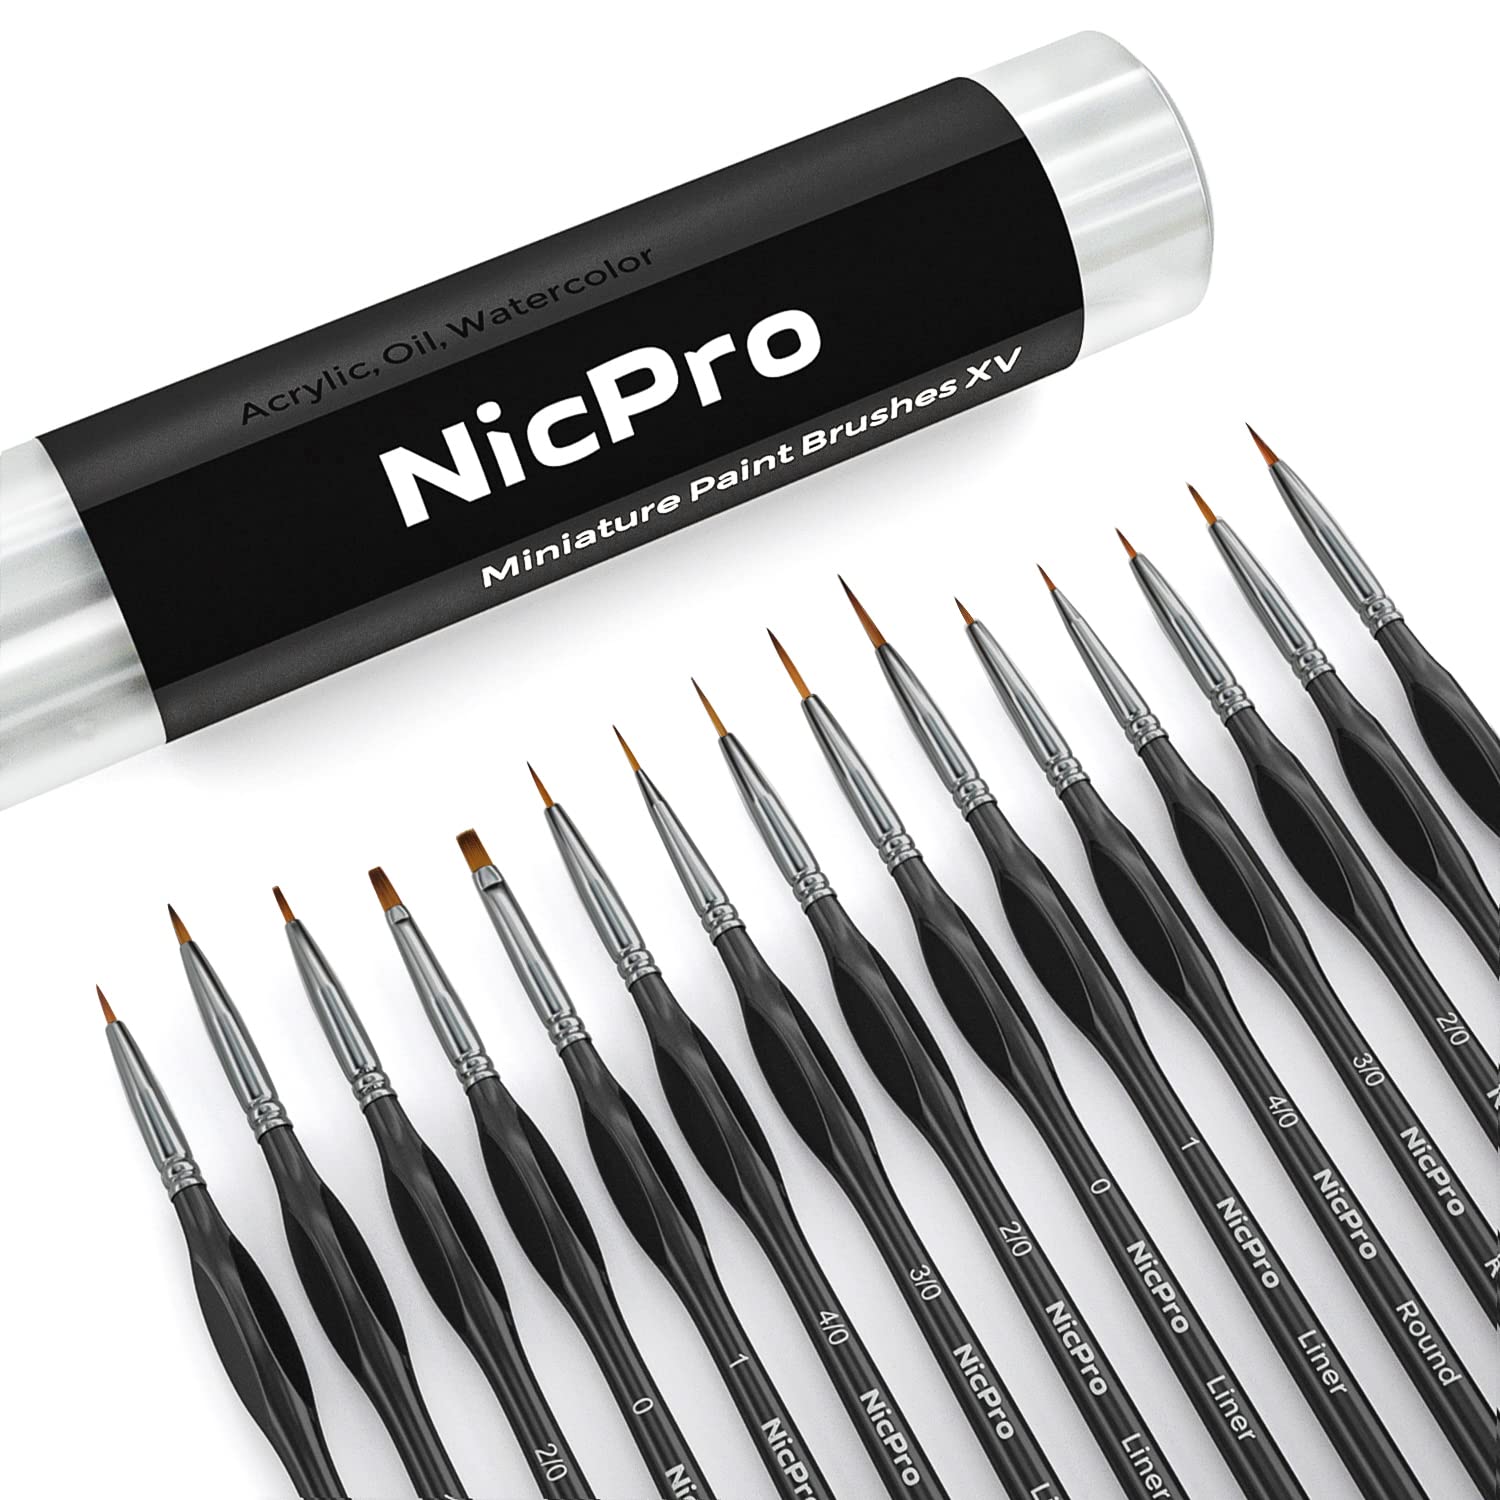 Nicpro Micro Detail Paint Brush Set,15 PCS Black Small Professional Miniature Fine Detail Brushes for Watercolor Oil Acrylic, Craft Models Rock Painting & Paint by Number -Come with Holder Bag